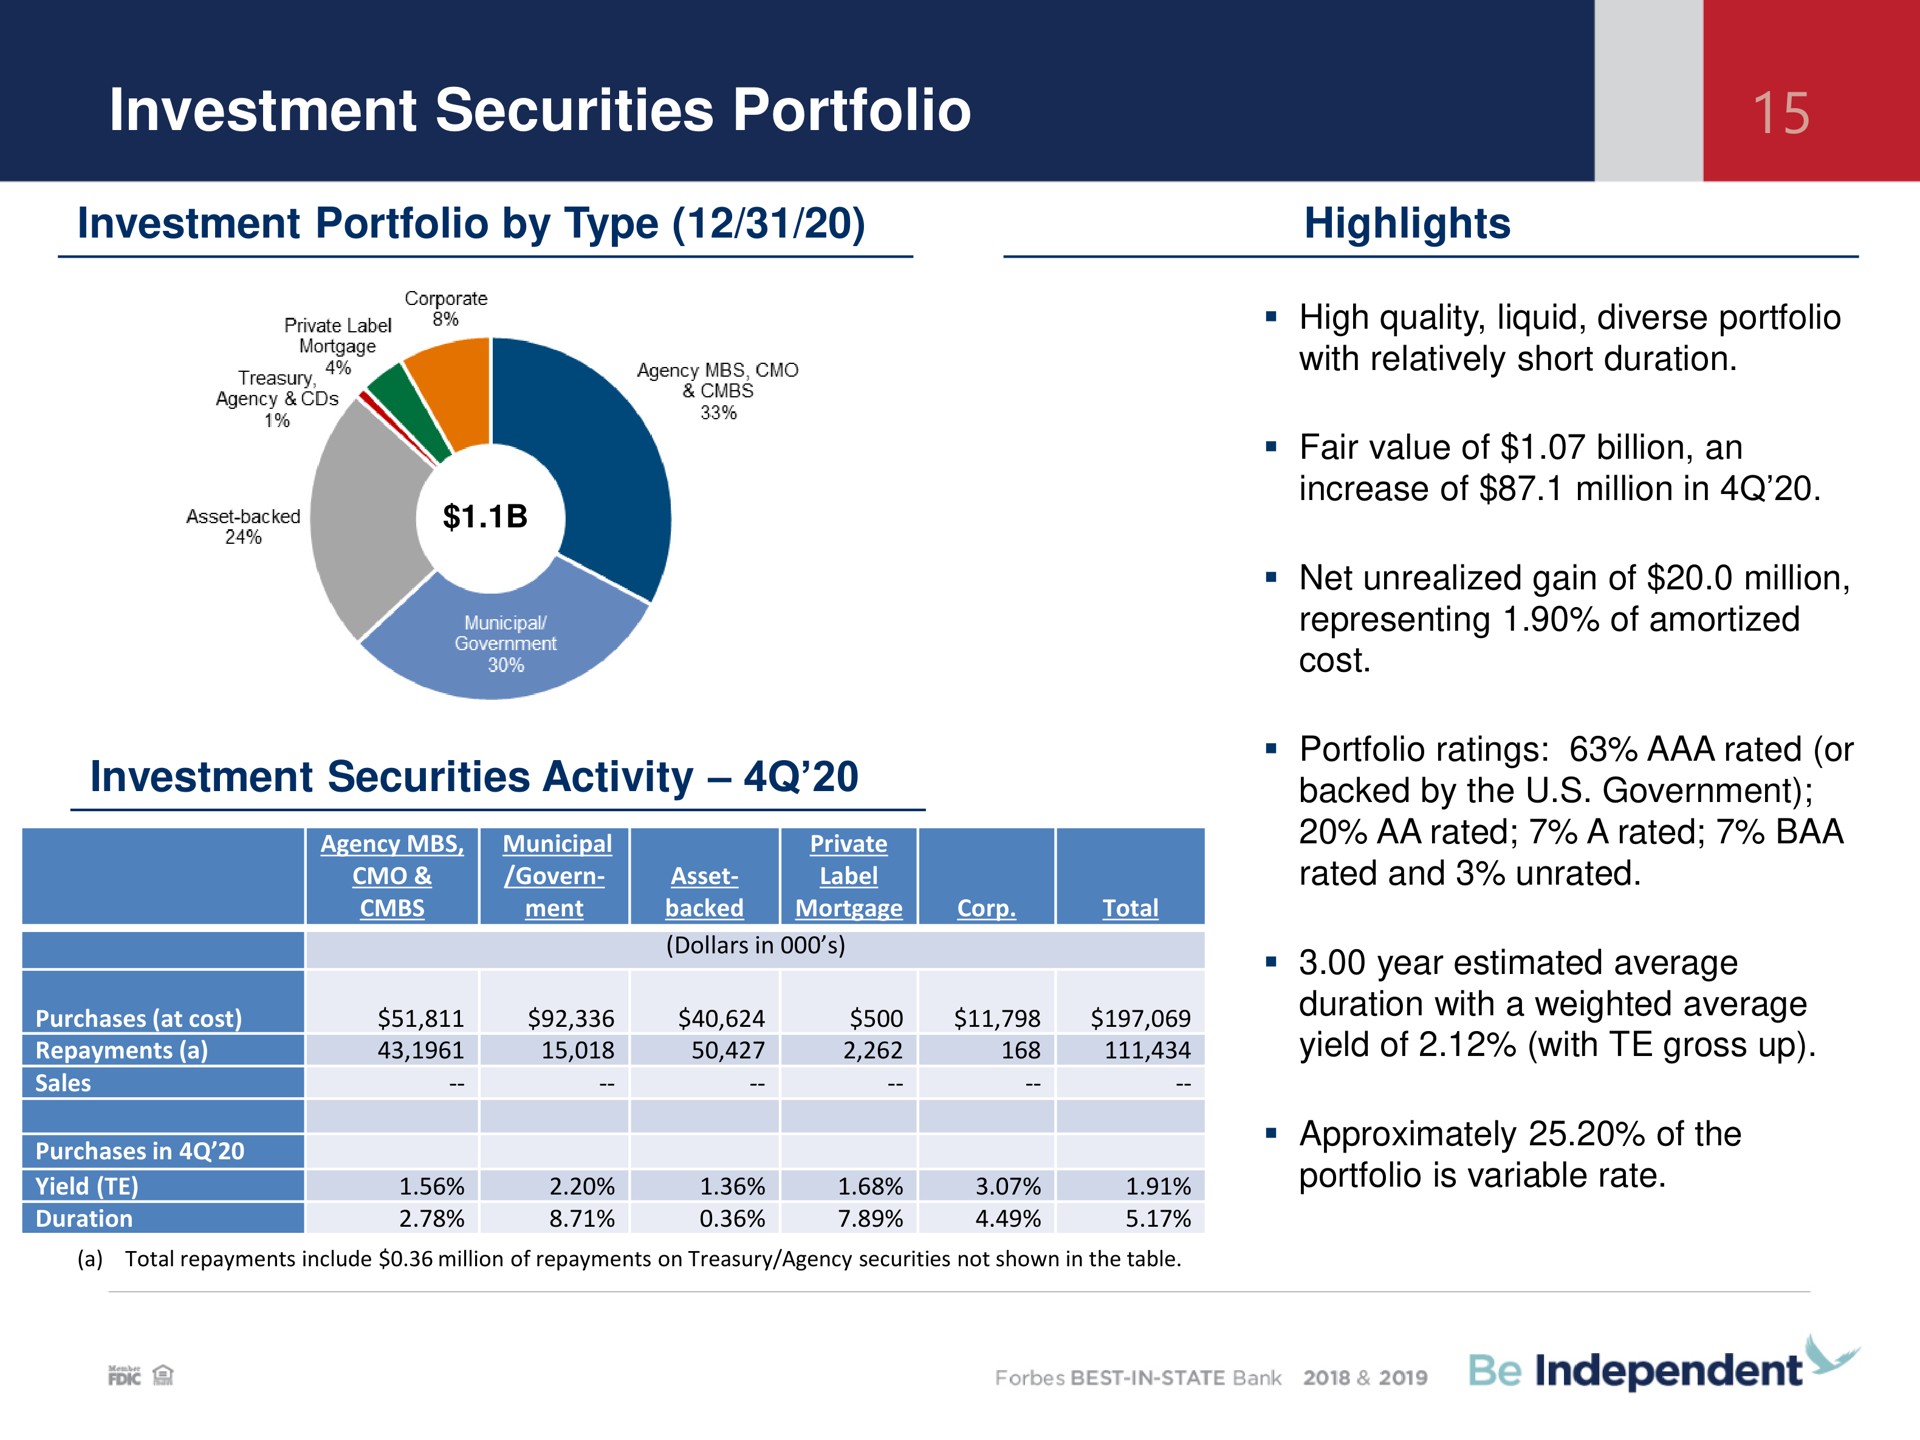 investment securities portfolio by type activity highlights backed by the government year estimated average | Independent Bank Corp